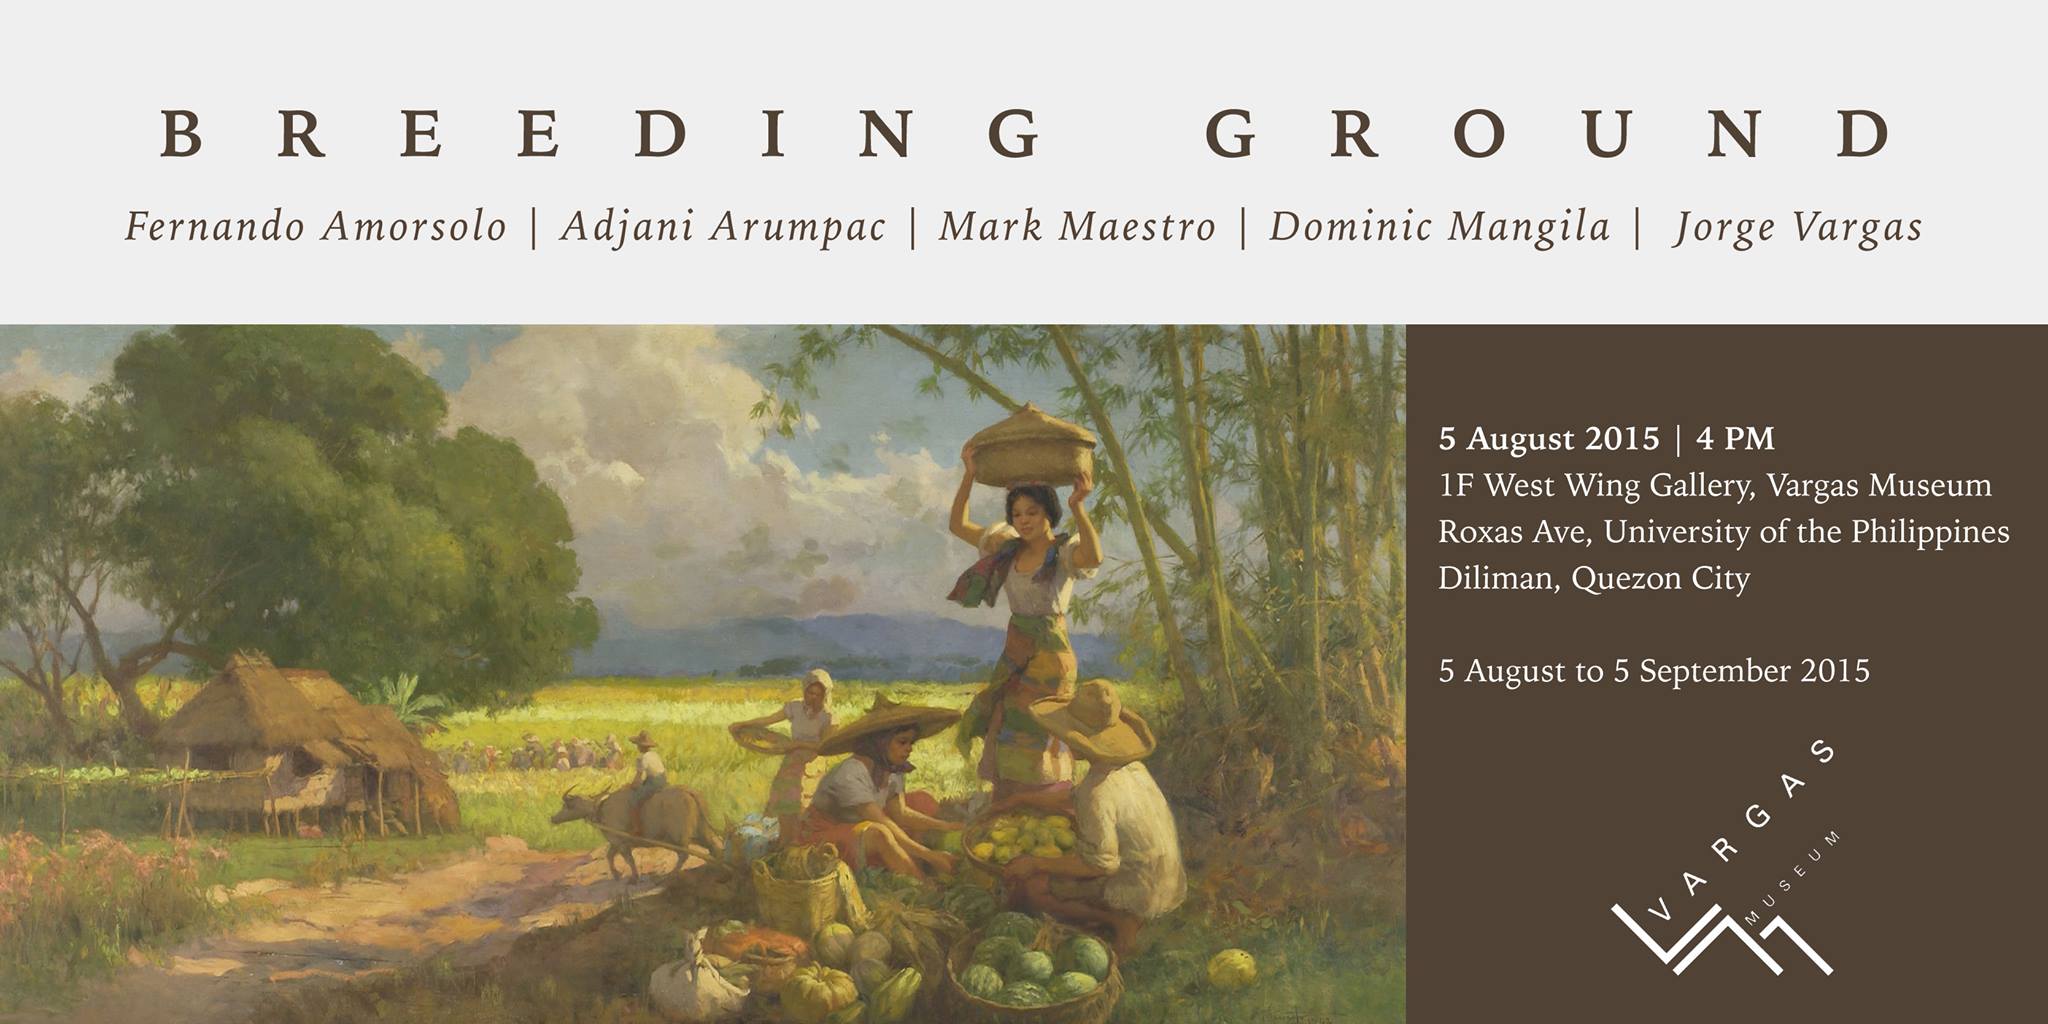 Breeding Ground     Wednesday, August 5     at 4:00pm     Starts in about 4 hours · 89°F Scattered Clouds     	     Show Map     UP Vargas Museum     University of the Philippines, 1101 Diliman, Quezon City, Philippines UP Vargas Museum presents Breeding Ground on August 5, Wednesday at 4pm at the West Wing Gallery. The exhibition revolves around five articulations of image and image making: two paintings, a film, a sculpture, and an essay. These moments of form and formativity render the properties of land, the material that is made dense through pigment, narrative, earth, word, light, shadow, stroke, turn of phrase. Land is object at the same time that it is staked out as earth by people who claim it, fight and die for it, live off it, become wretched and lords-in-dominion because of it. It is, therefore, ultimately subject because it is potential, a medium through which life is possessed. Breeding Ground runs until September 5. For more information, please contact Vargas Museum at (+632) 928-1927 (direct line), (+632) 981-8500 loc. 4024 (UP trunkline), (+632) 928-1925 (fax) or send an e-mail to vargasmuseum@gmail.com. You may also check our website at http://vargasmuseum.upd.edu.ph/ or like us at http://www.facebook.com/vargasmuseum.upd and follow us @UPVargasMuseum for updates.